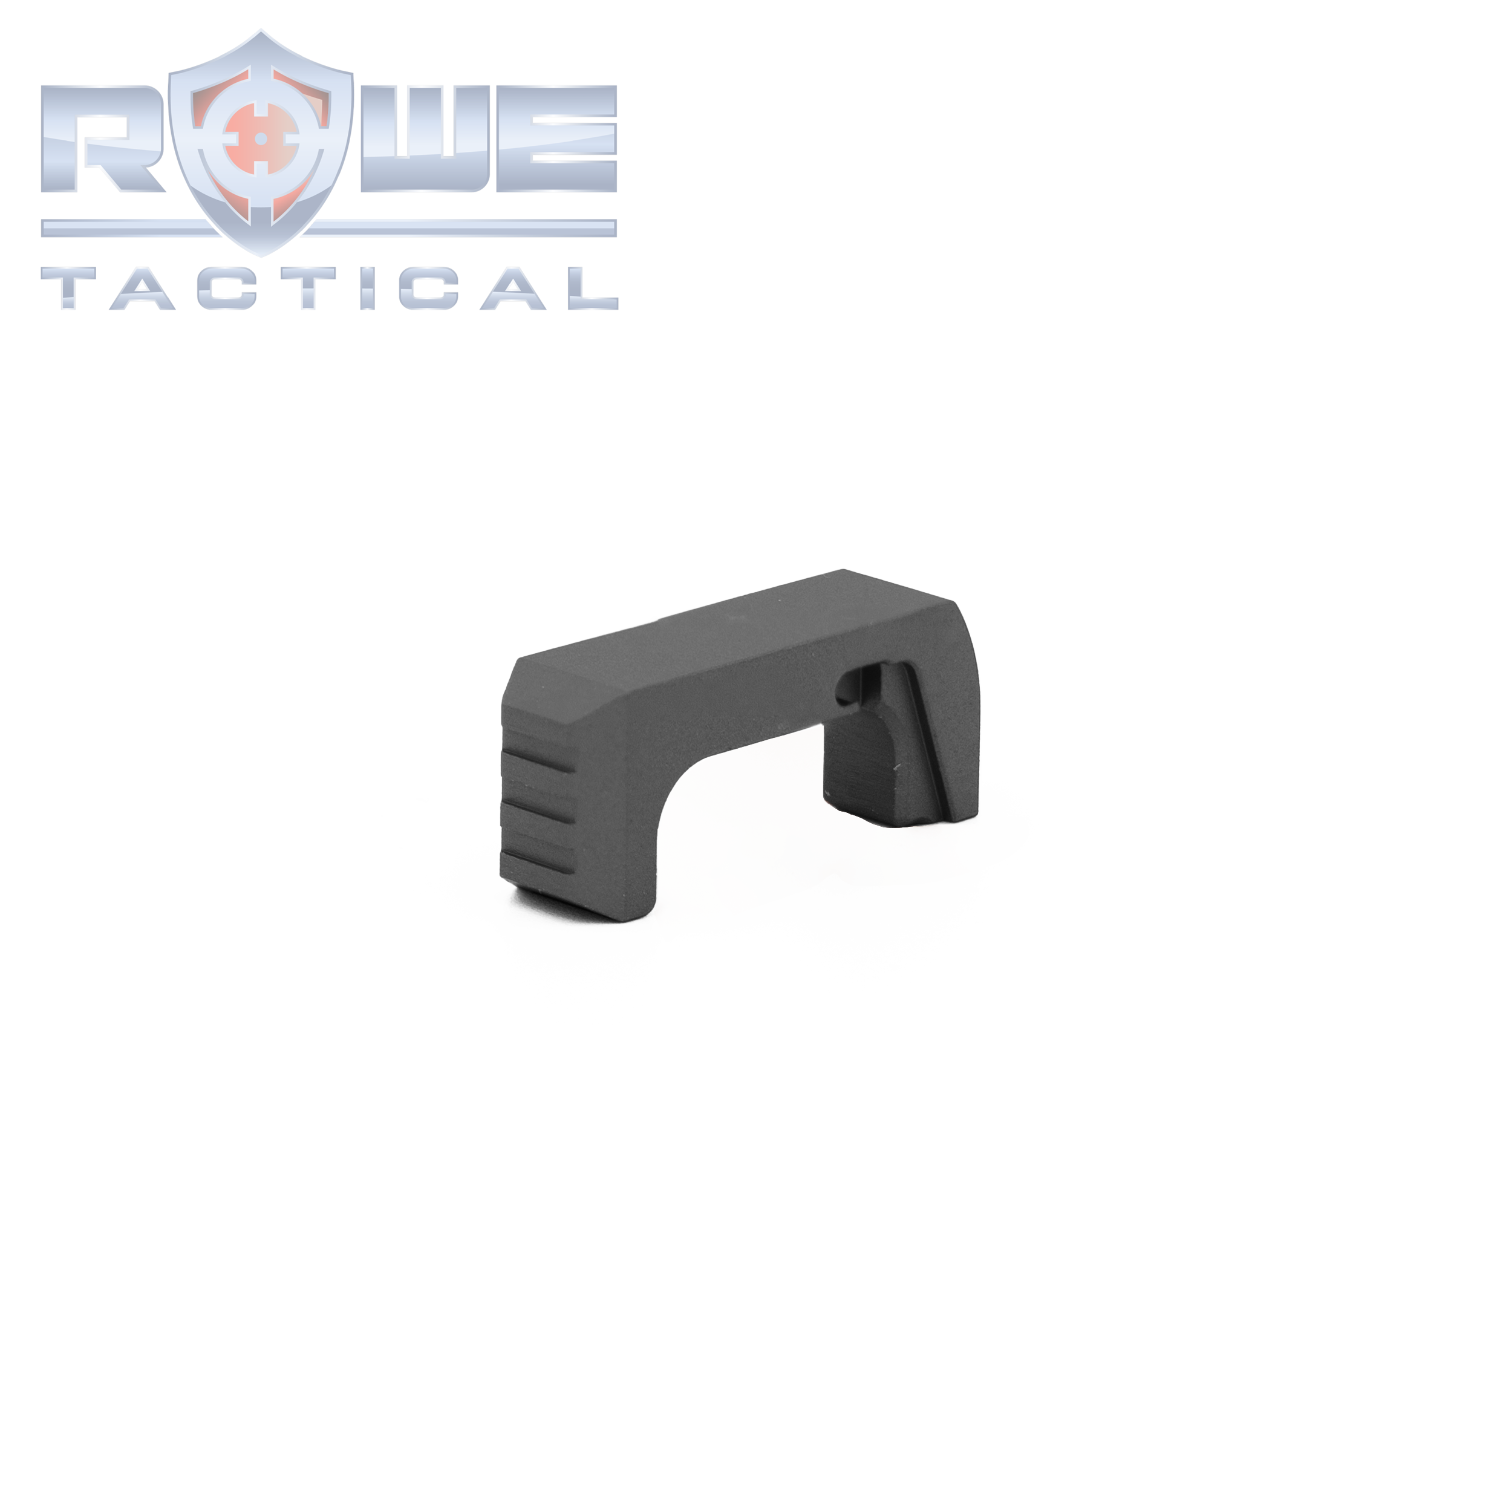 Rowe Tactical Extended Mag Release for Glock 43 / G43 - Black Anodized Aluminum Rowe Tactical 100063 - фотография #3